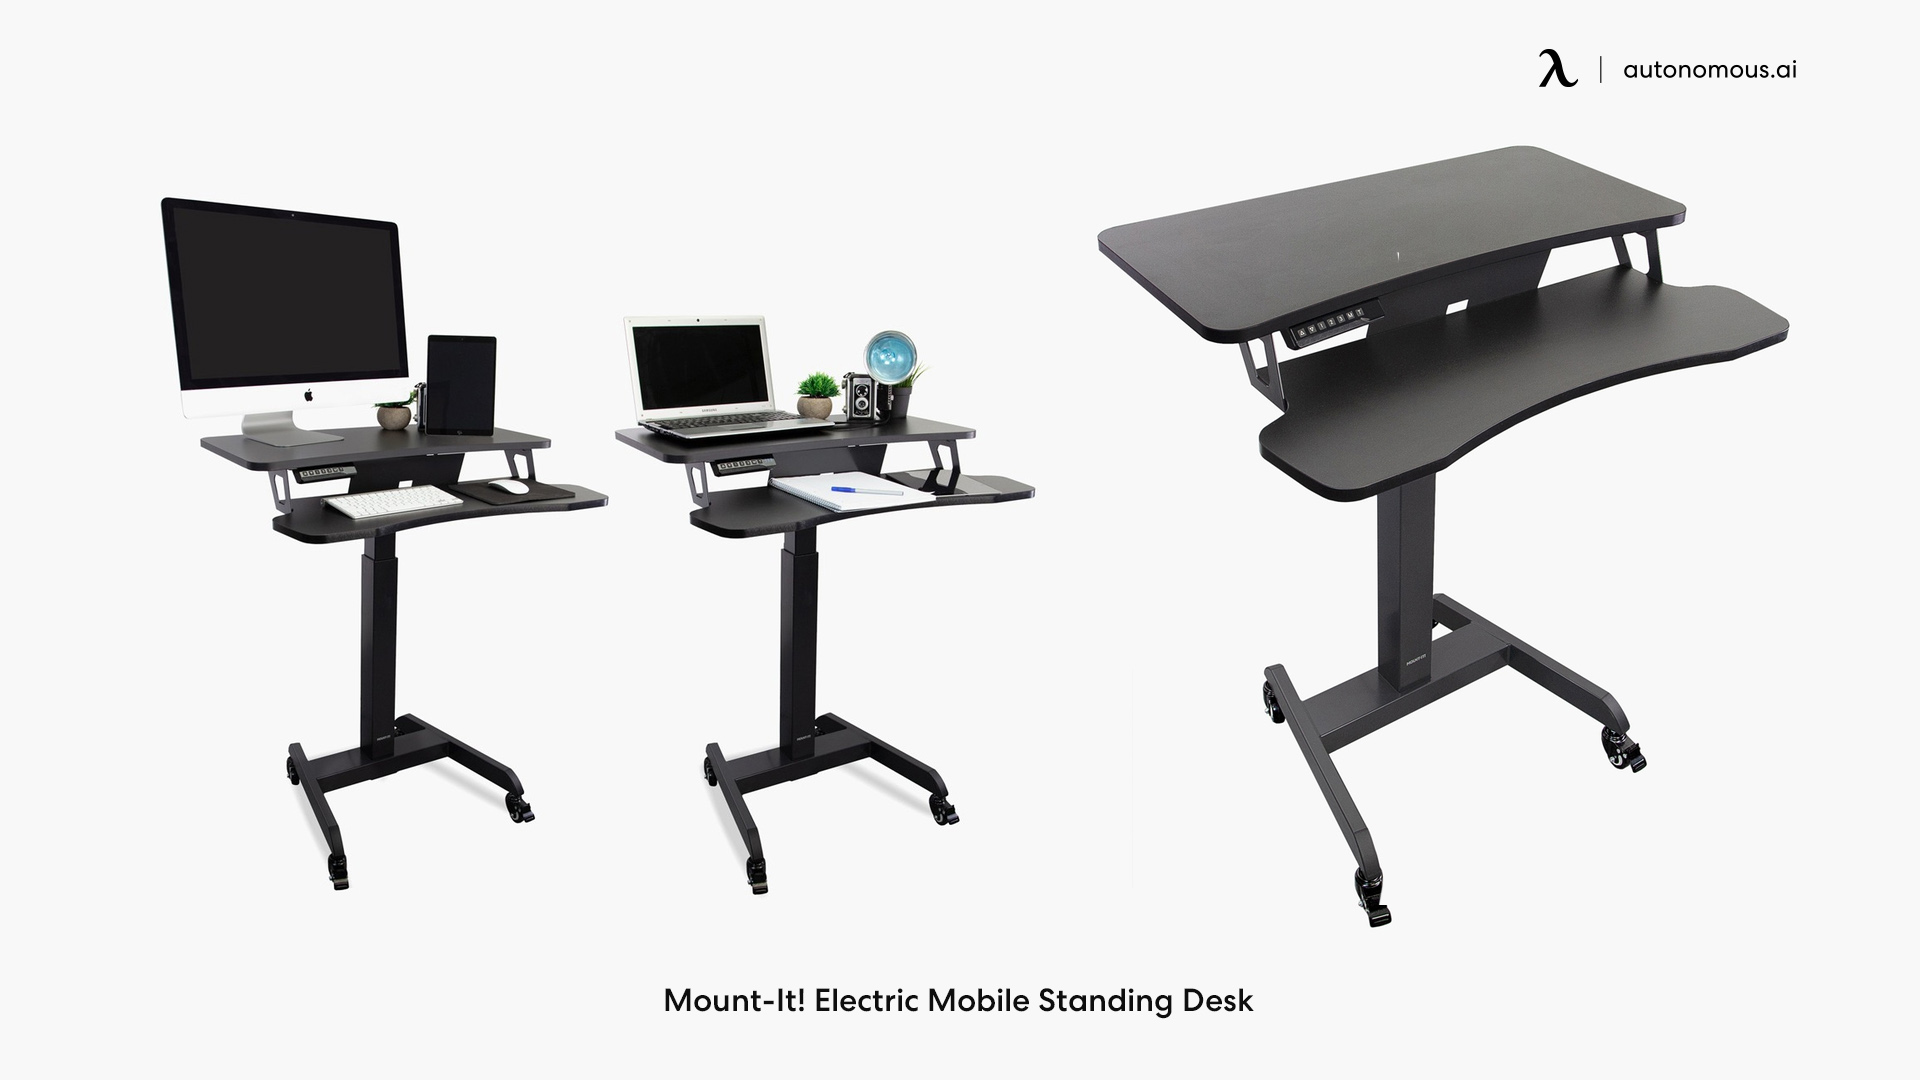 Mount-It! Electric Mobile Standing Desk